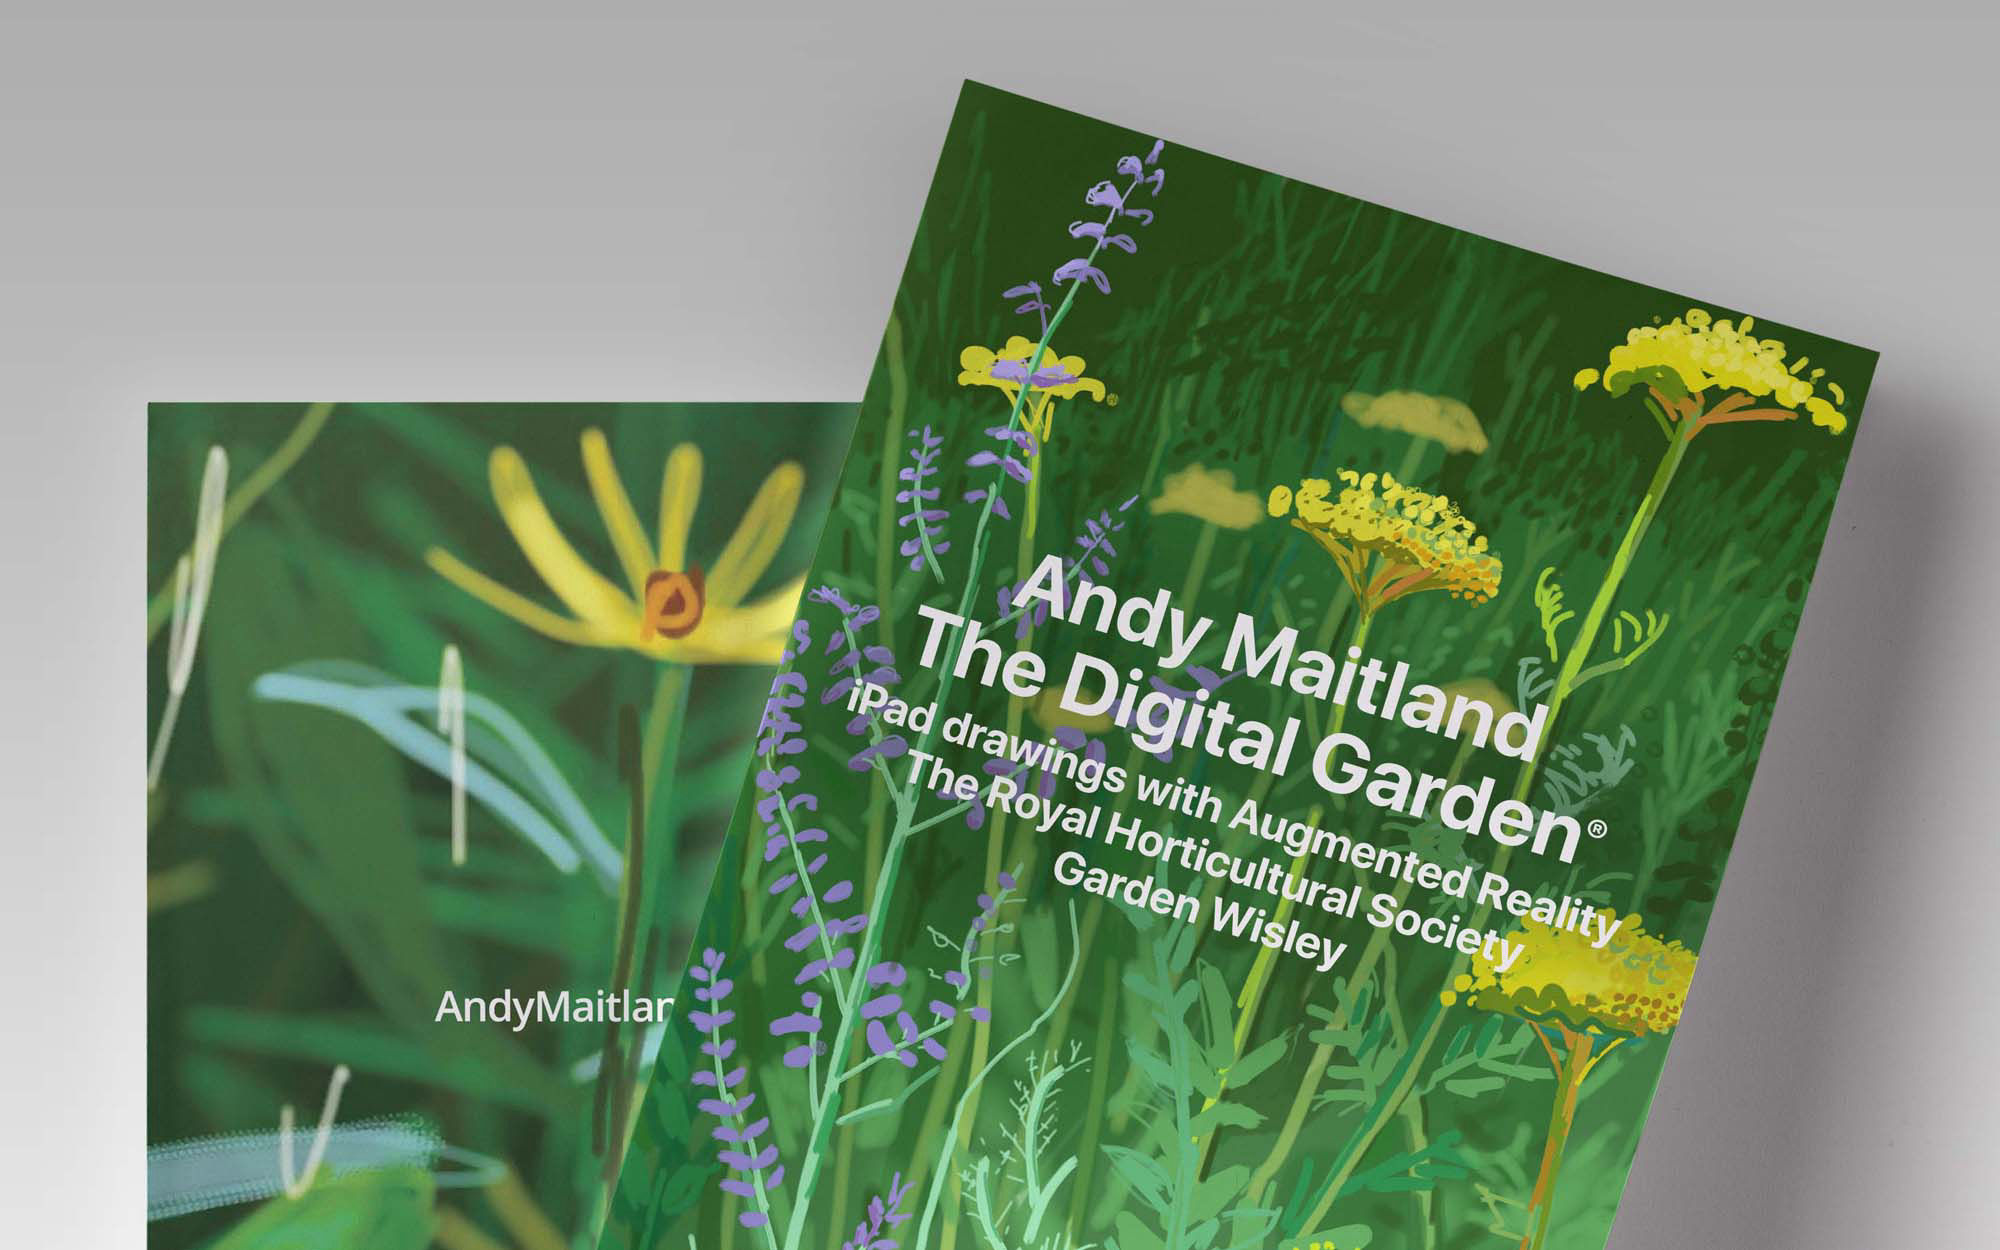 ‘The Digital Garden® 2018, iPad drawings with Augmented Reality (AR) at the Royal Horticultural Society Garden Wisley’.